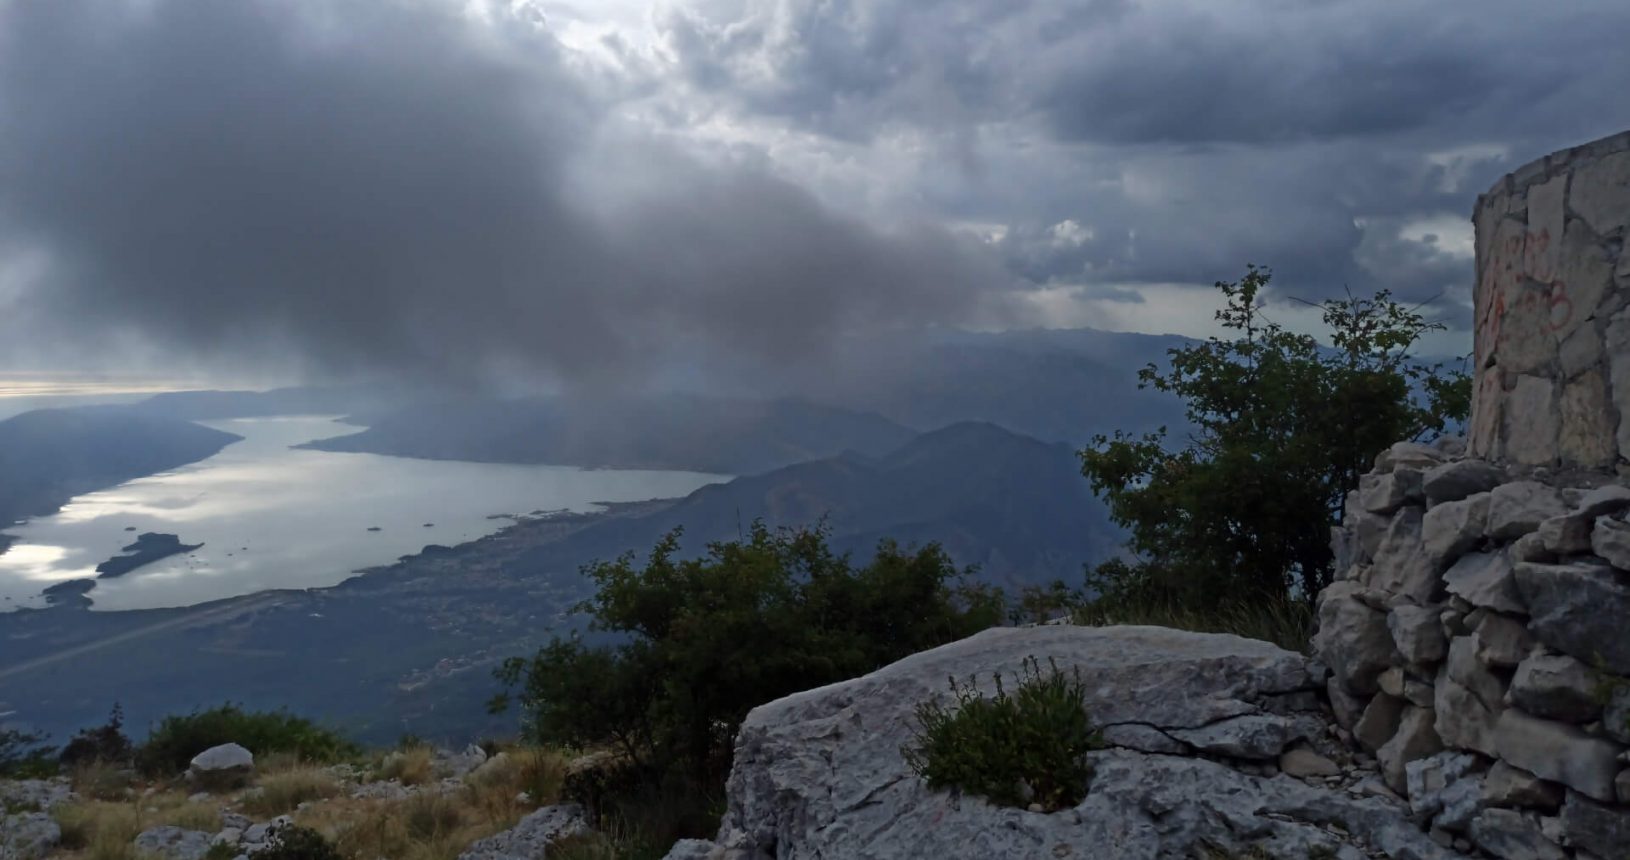 Stony side of View point for Kotor and Tivat Bay